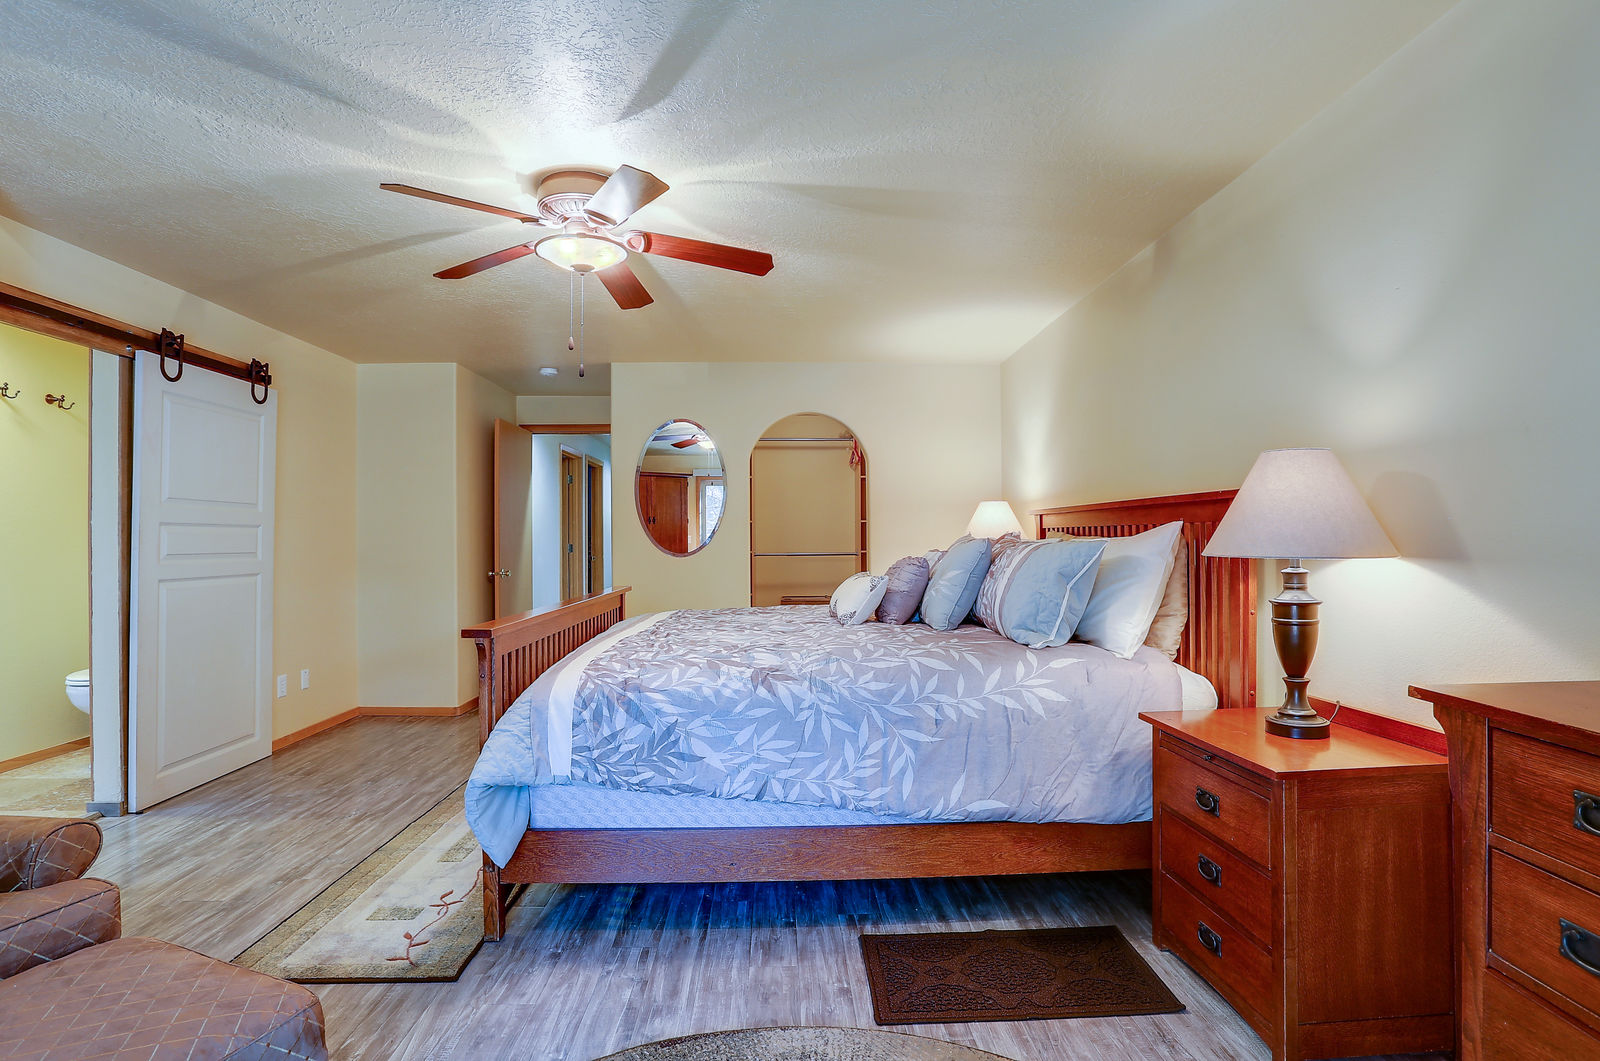 Our 3 beds vacation rentals in sunriver oregon